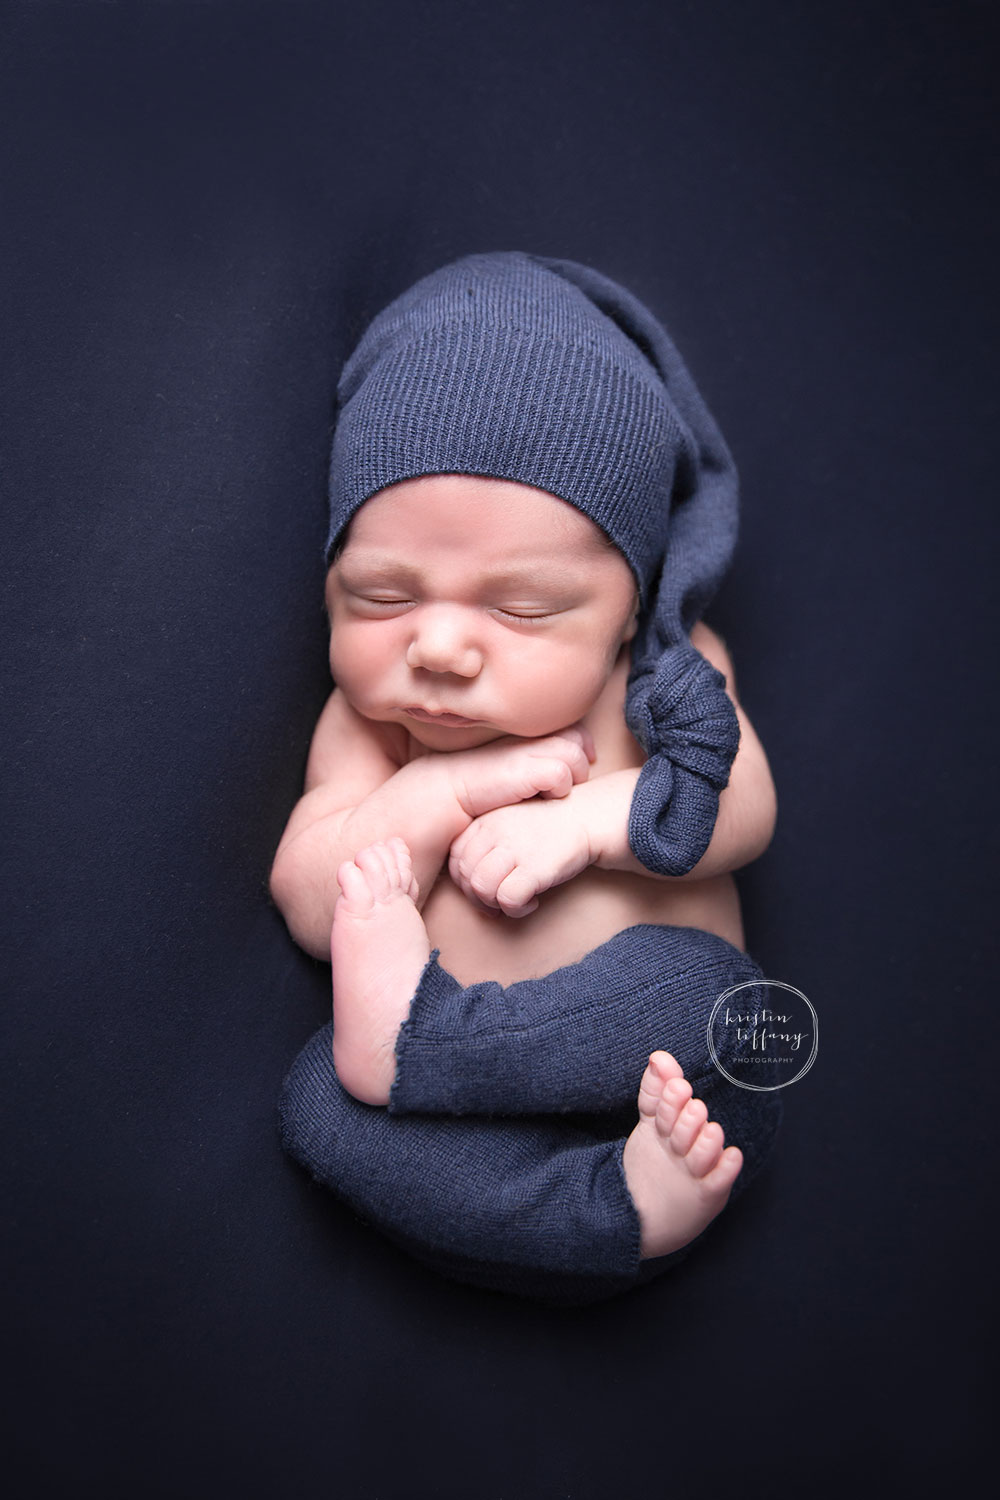 a photo of a newborn baby boy in a blue outfit